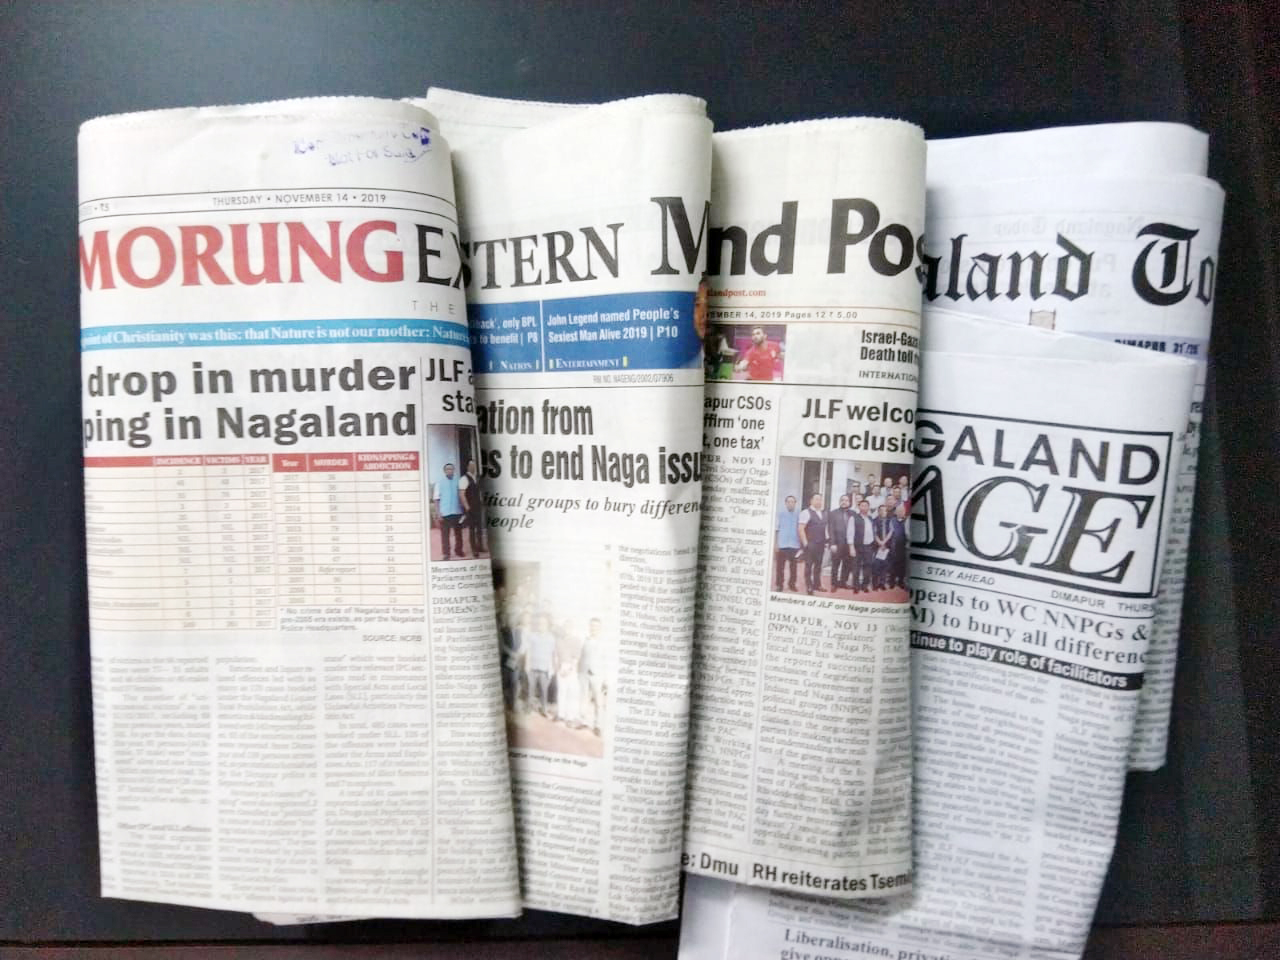 'Media in Nagaland has grown as voice of the voiceless'